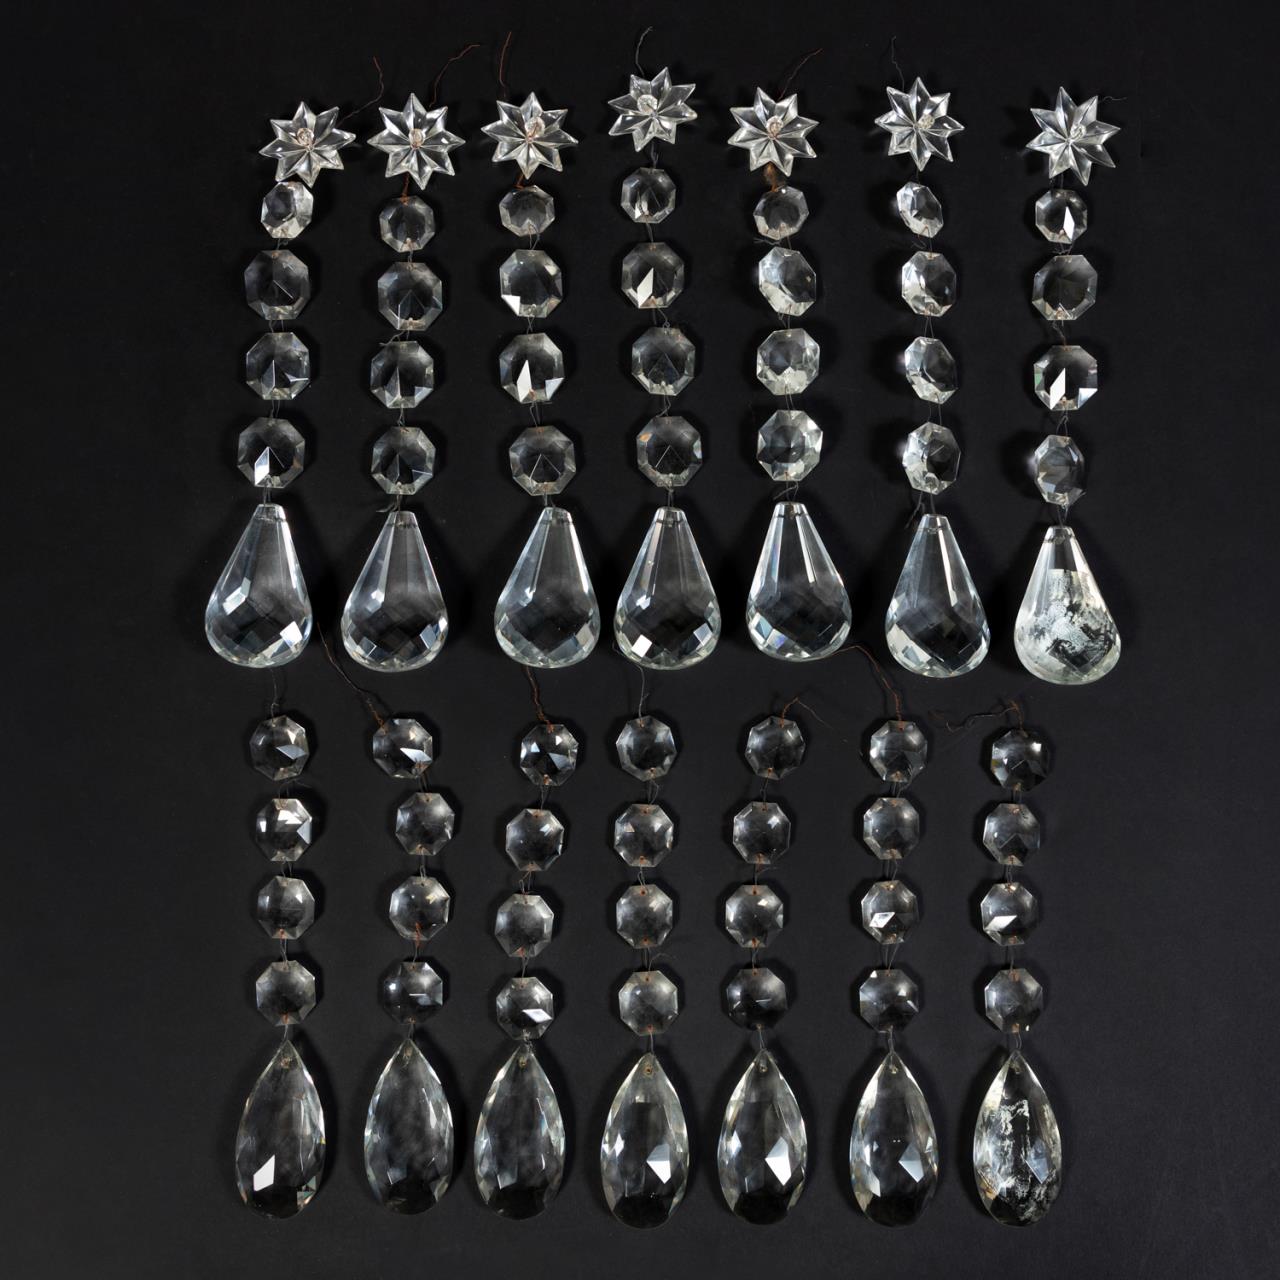 14PC SET OF FACETED CRYSTAL CHANDELIER 2888e0